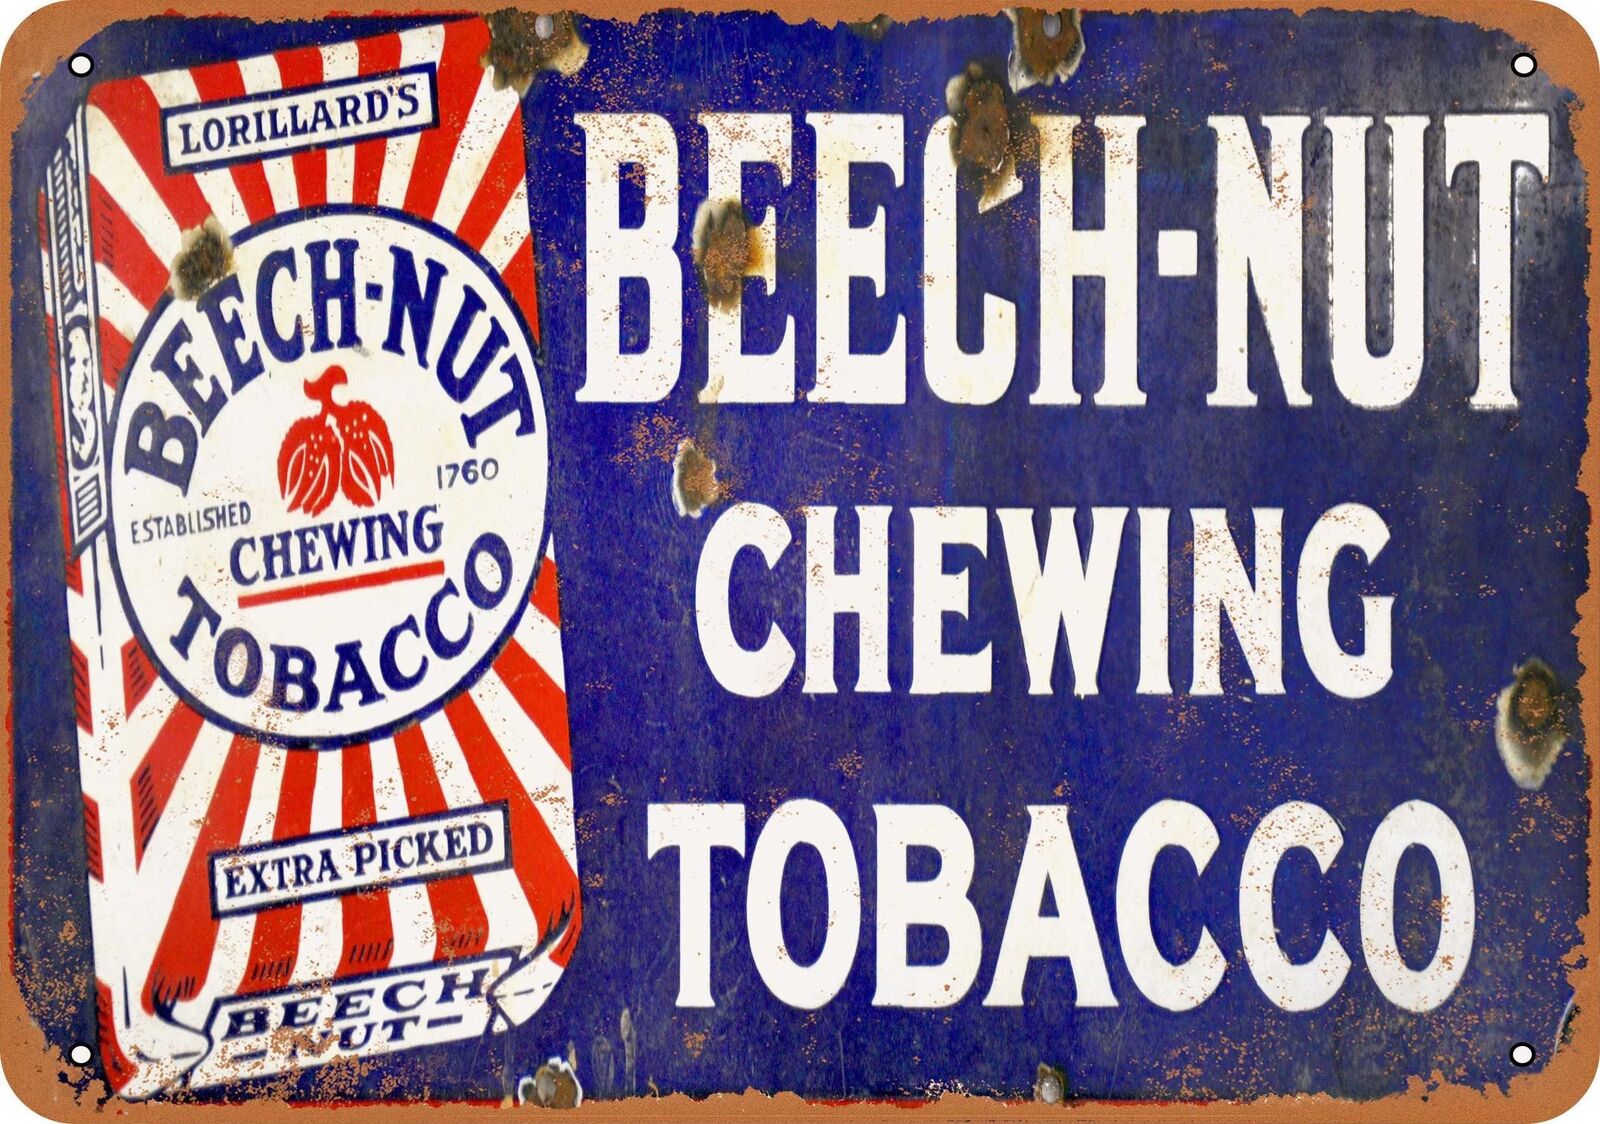 Metal Sign - Beech-Nut Chewing Tobacco - Vintage Look Reproduction